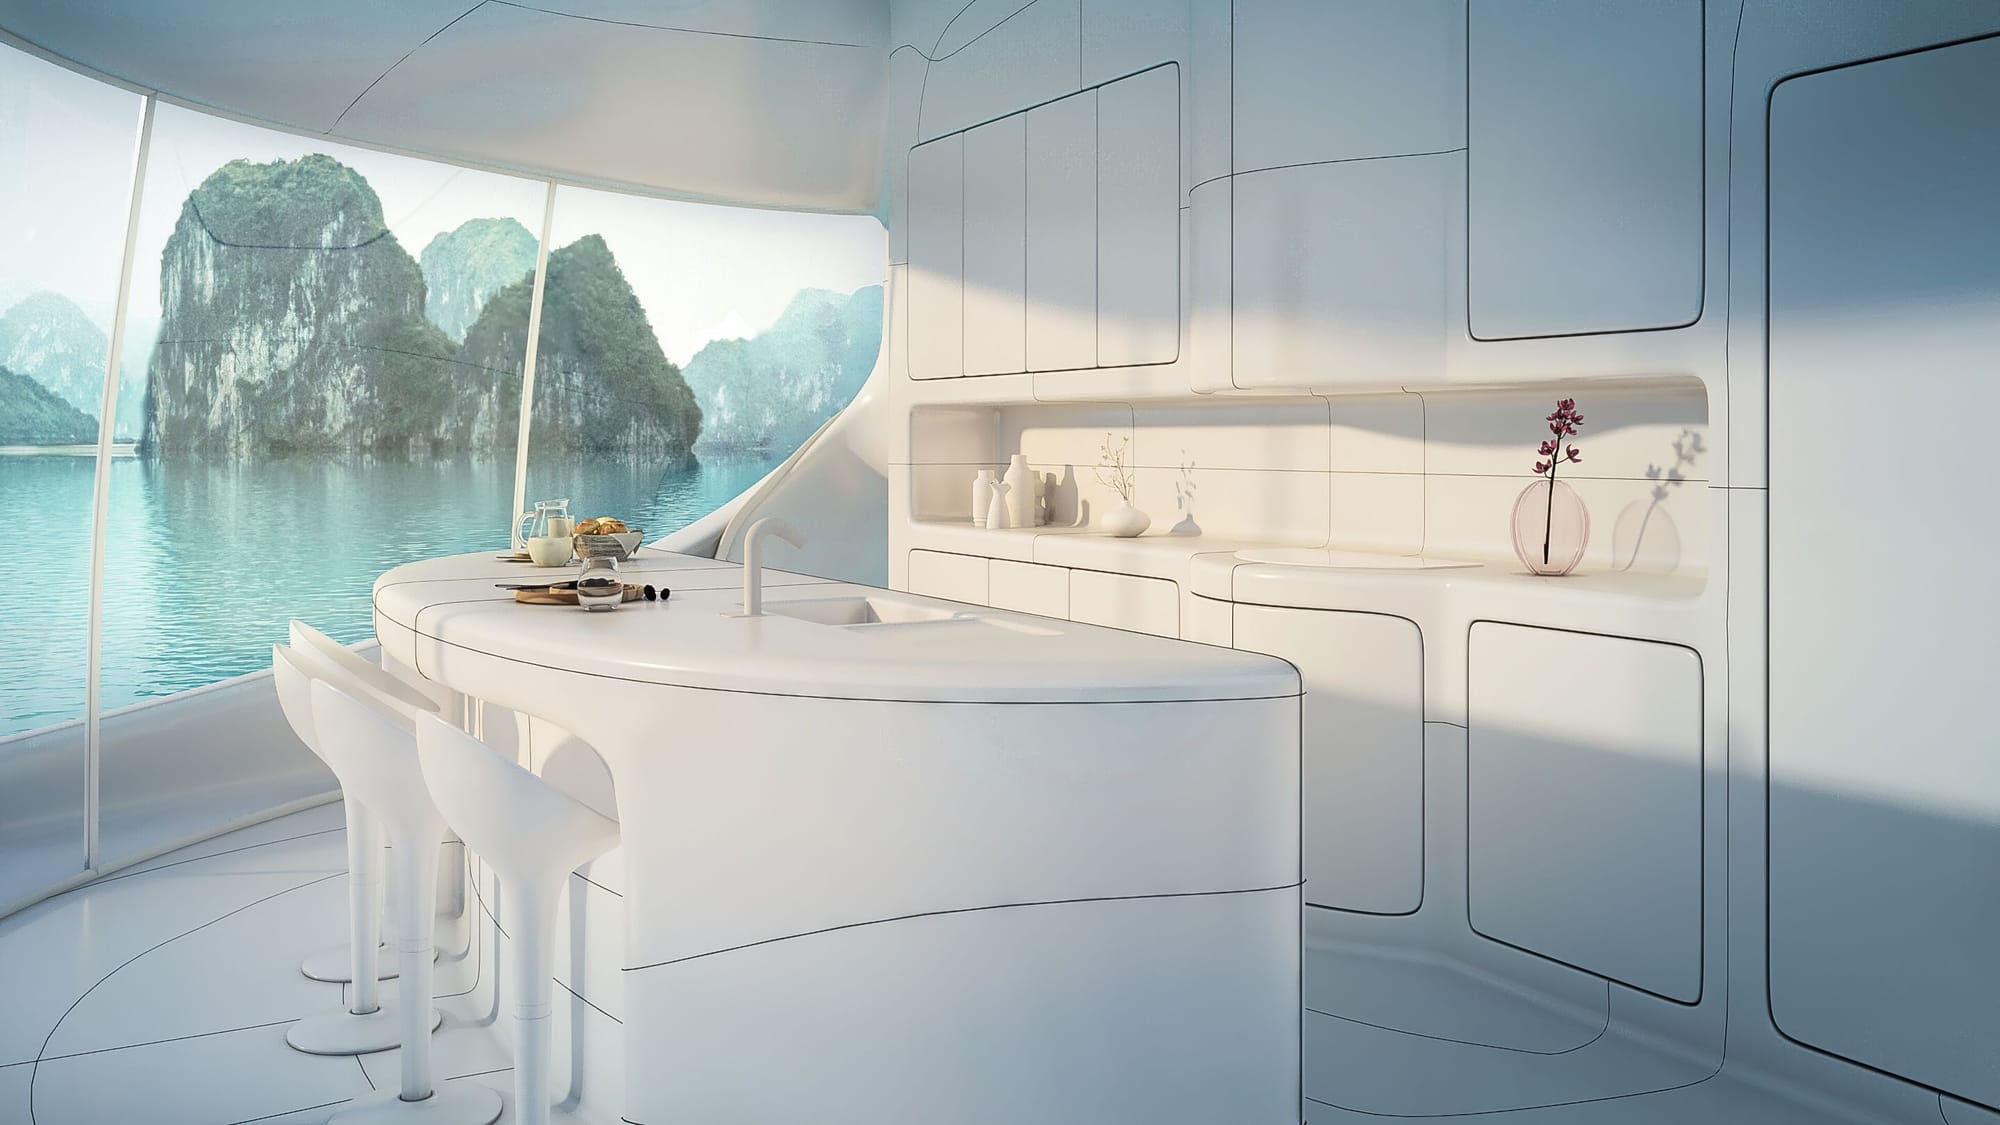 Minimalist kitchen space inside a SeaPod facing gorgeous views of the water. 